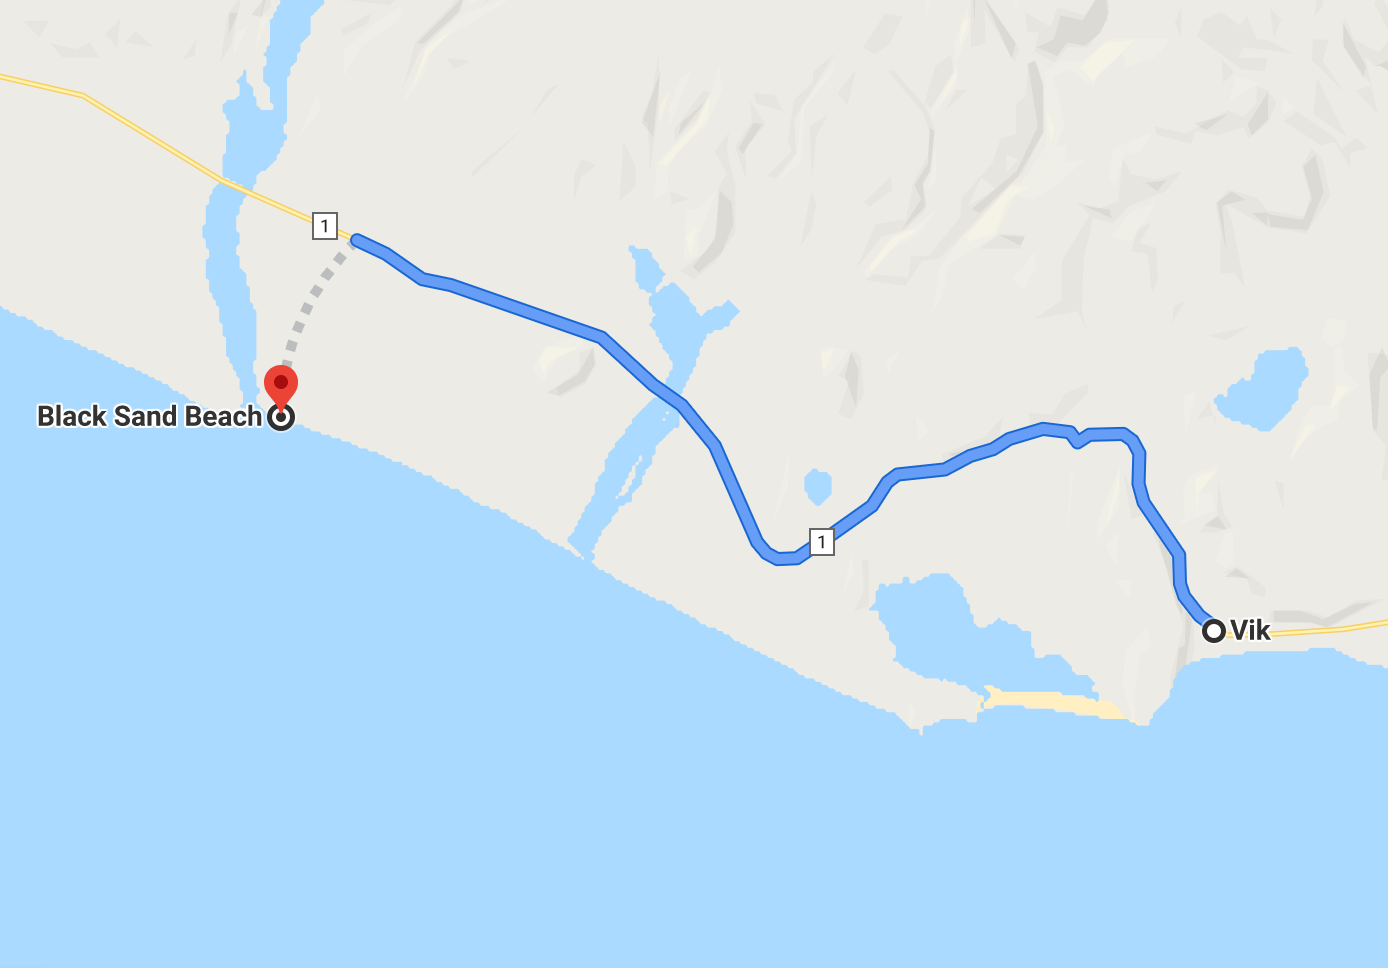 Driving route from Black Sand Beach to Vík